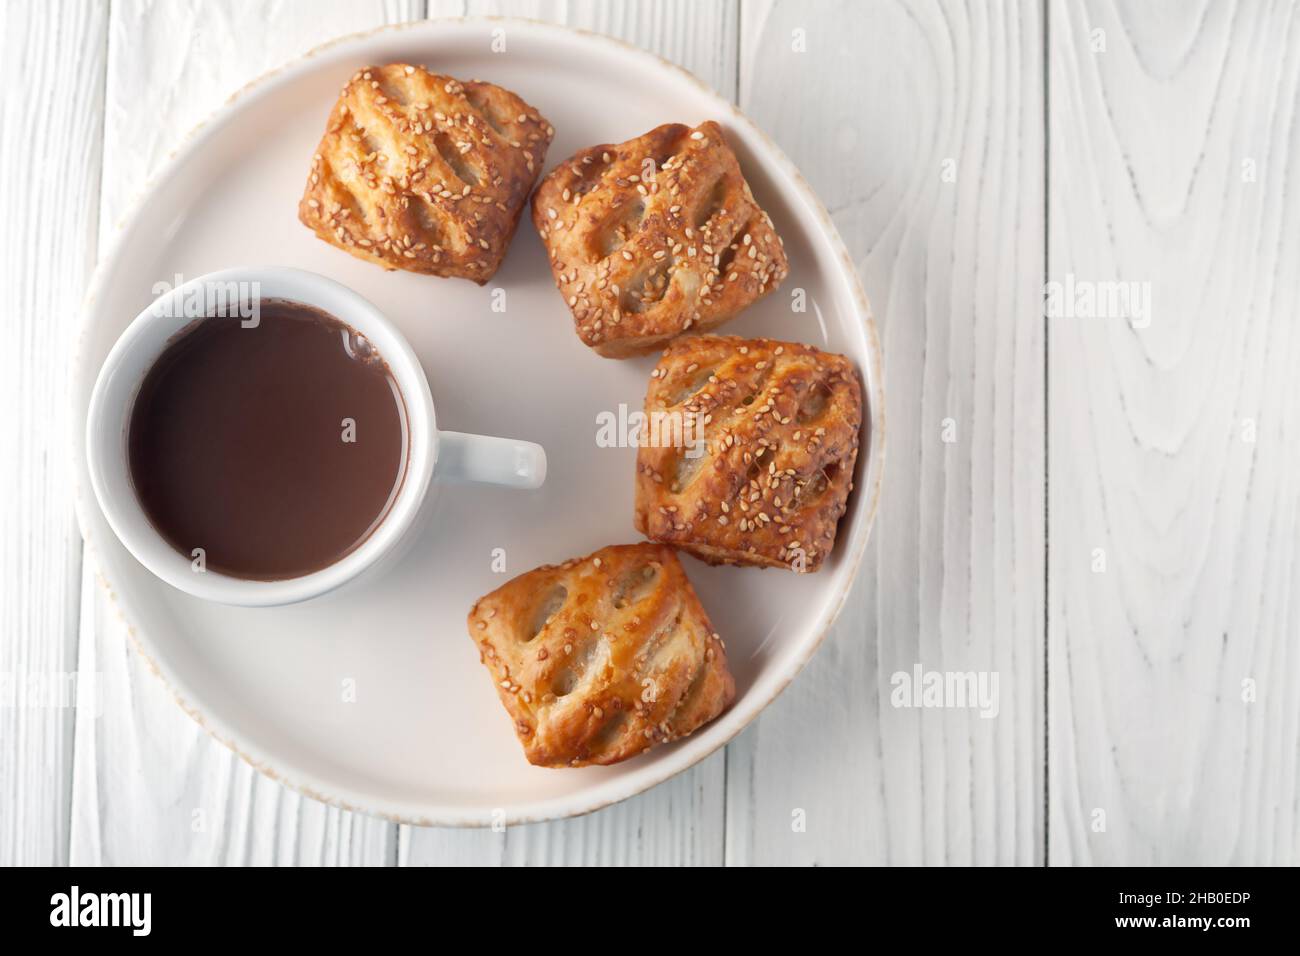 On a white wooden table there is a mug with hot chocolate and fresh aromatic puffs. Stock Photo